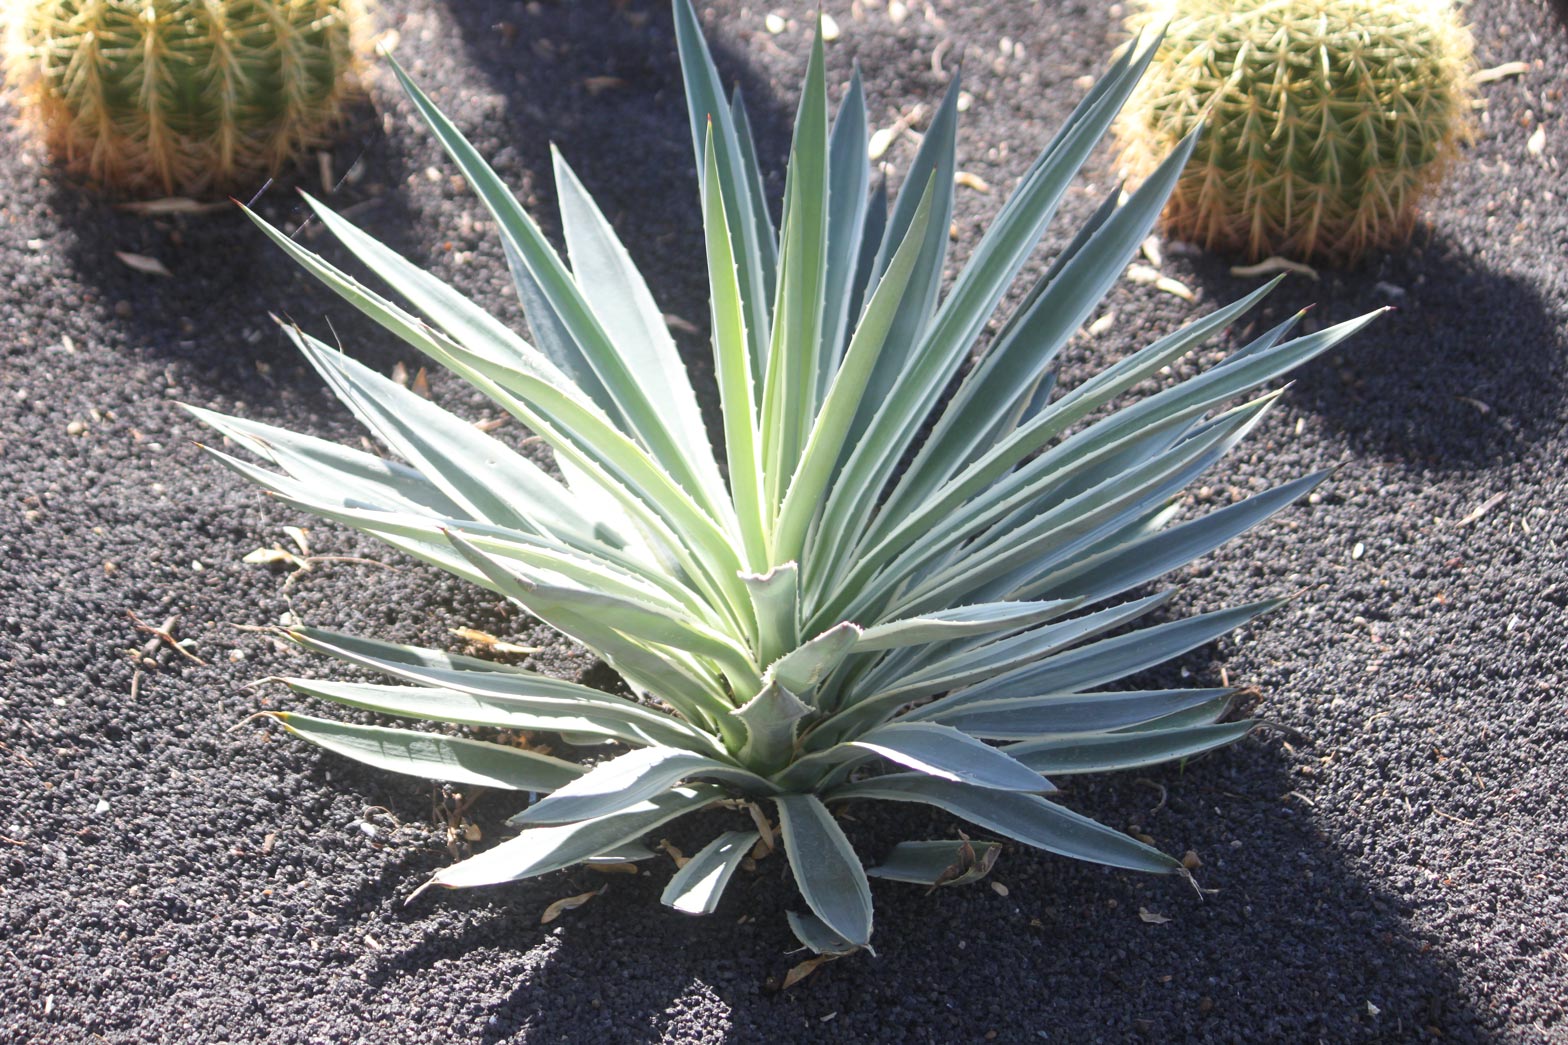 A small Caribbean Agave in the specimen bed.